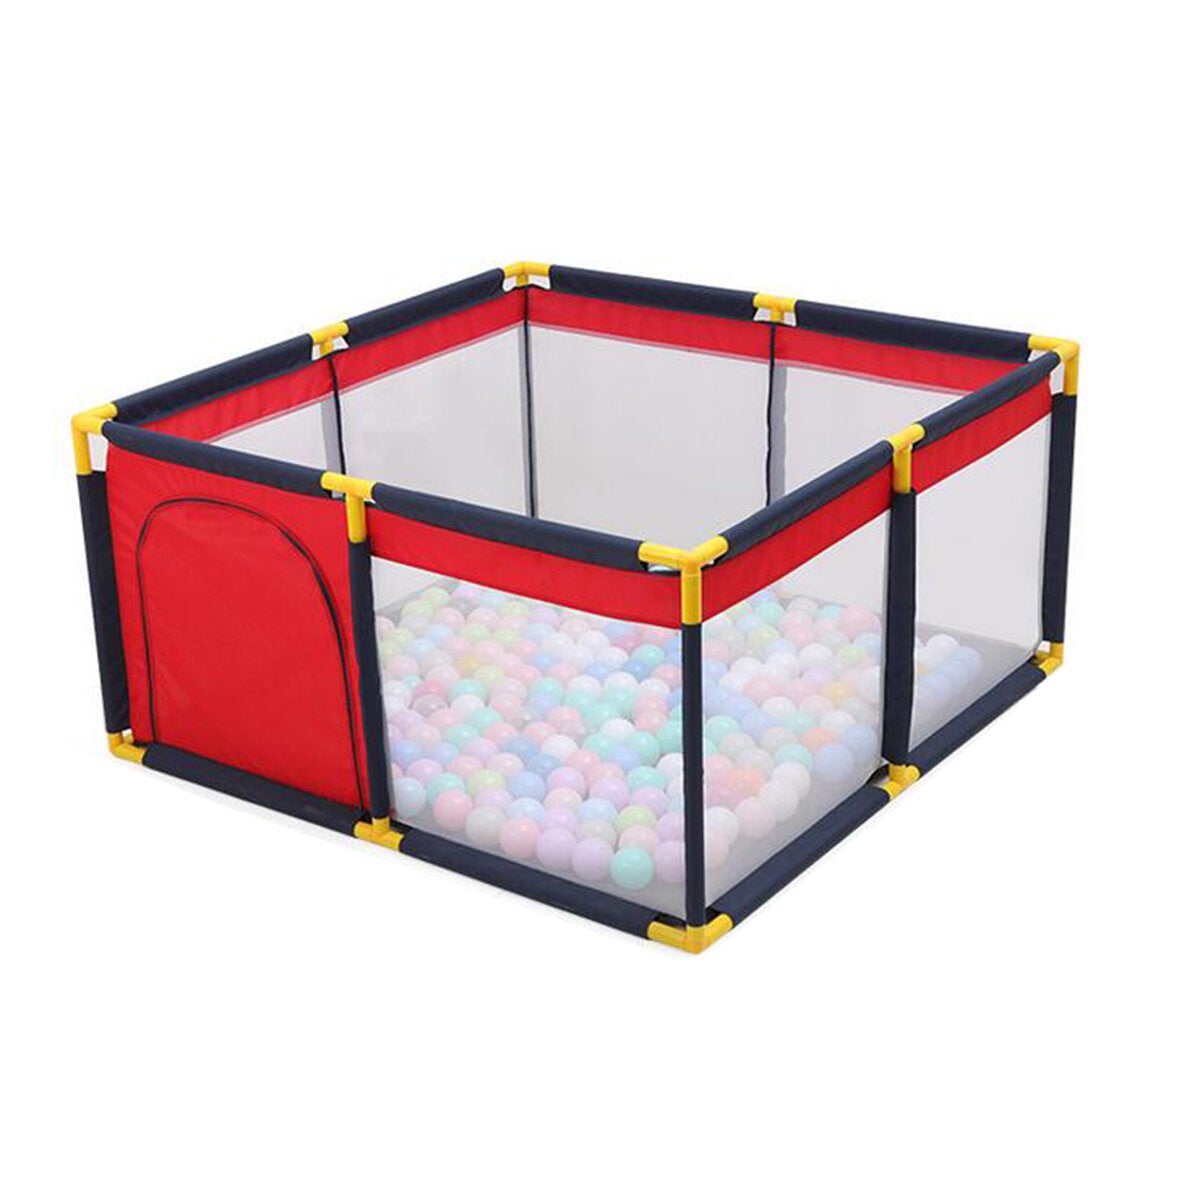 Childrens Play Fence Baby Safety Fence Foldable Fence Childrens Indoor Fence Toys